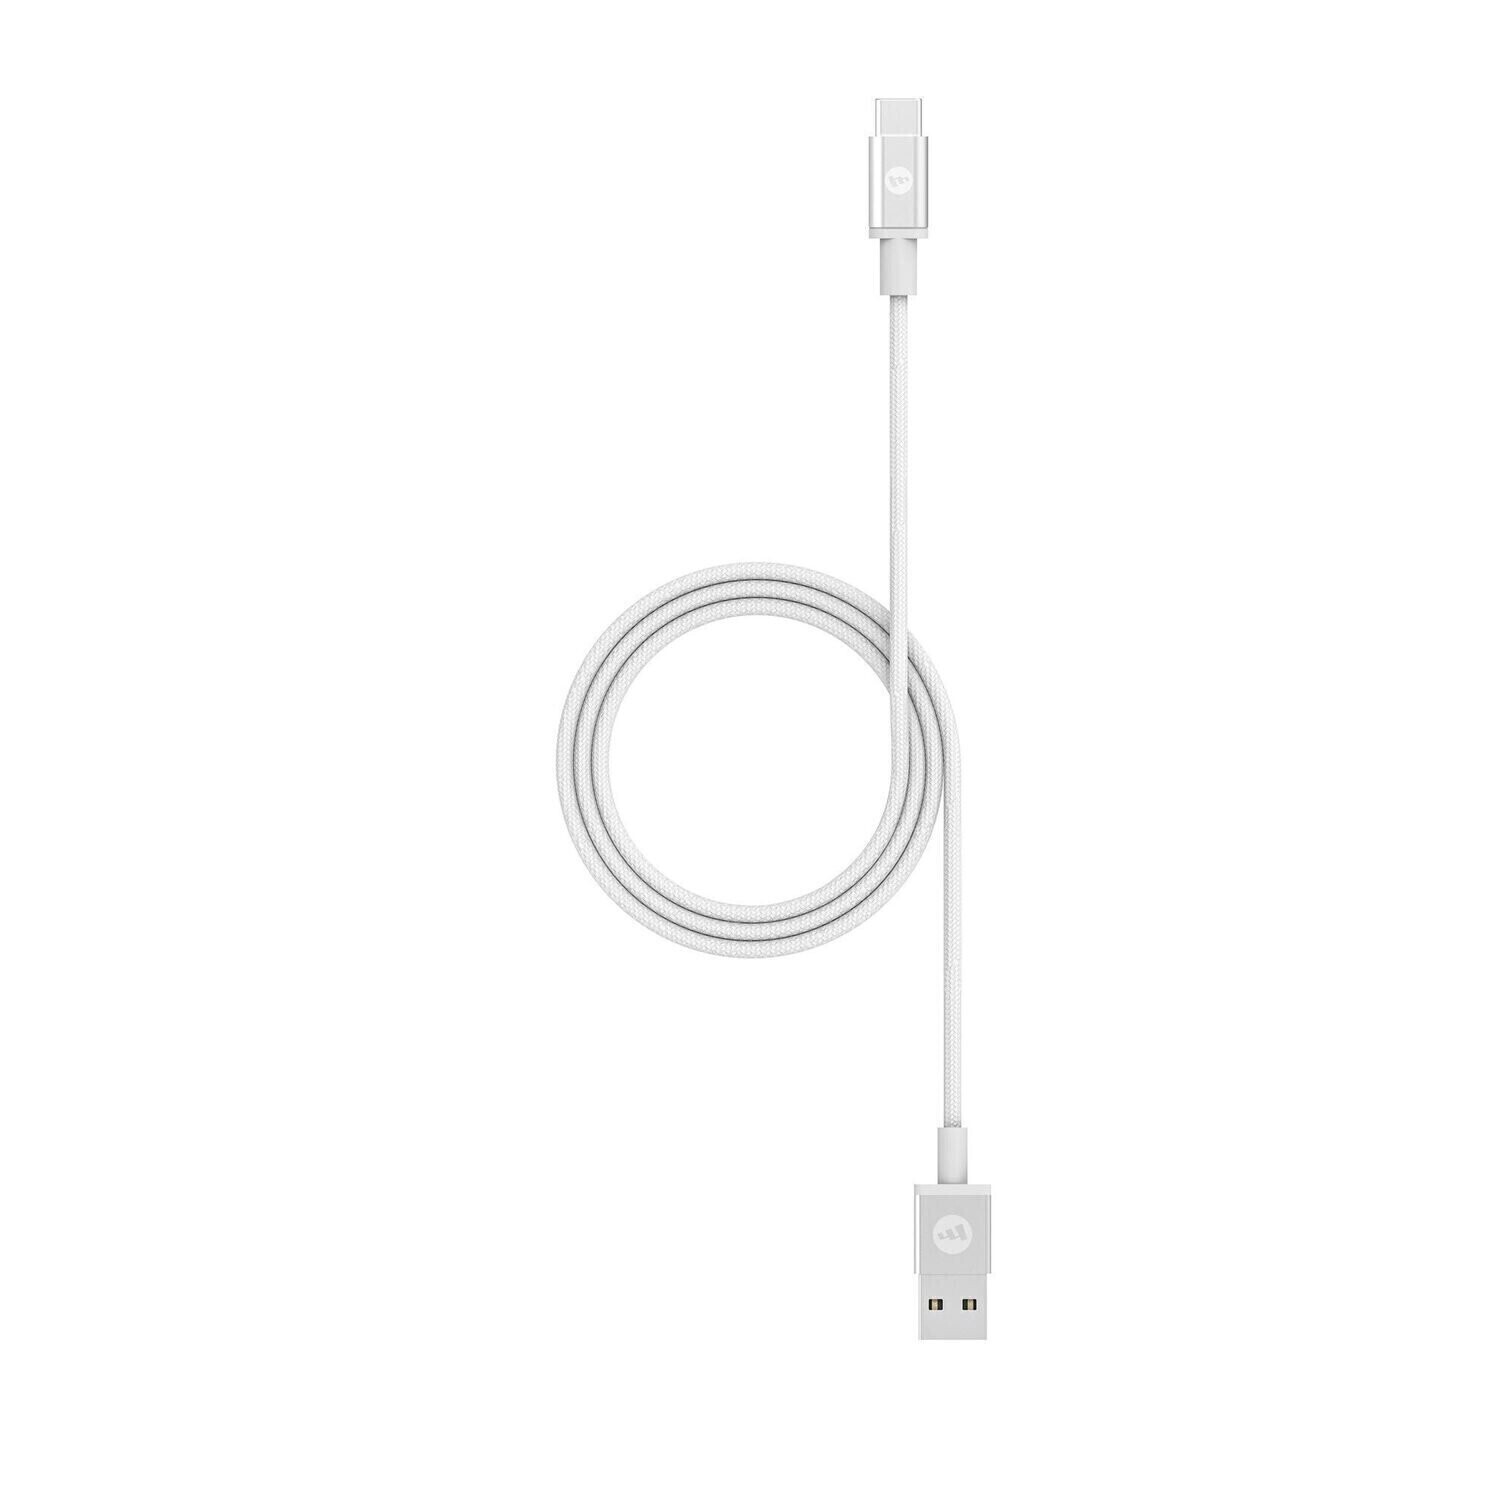 Mophie Cable USB-A to USB-C (1 Meter), White